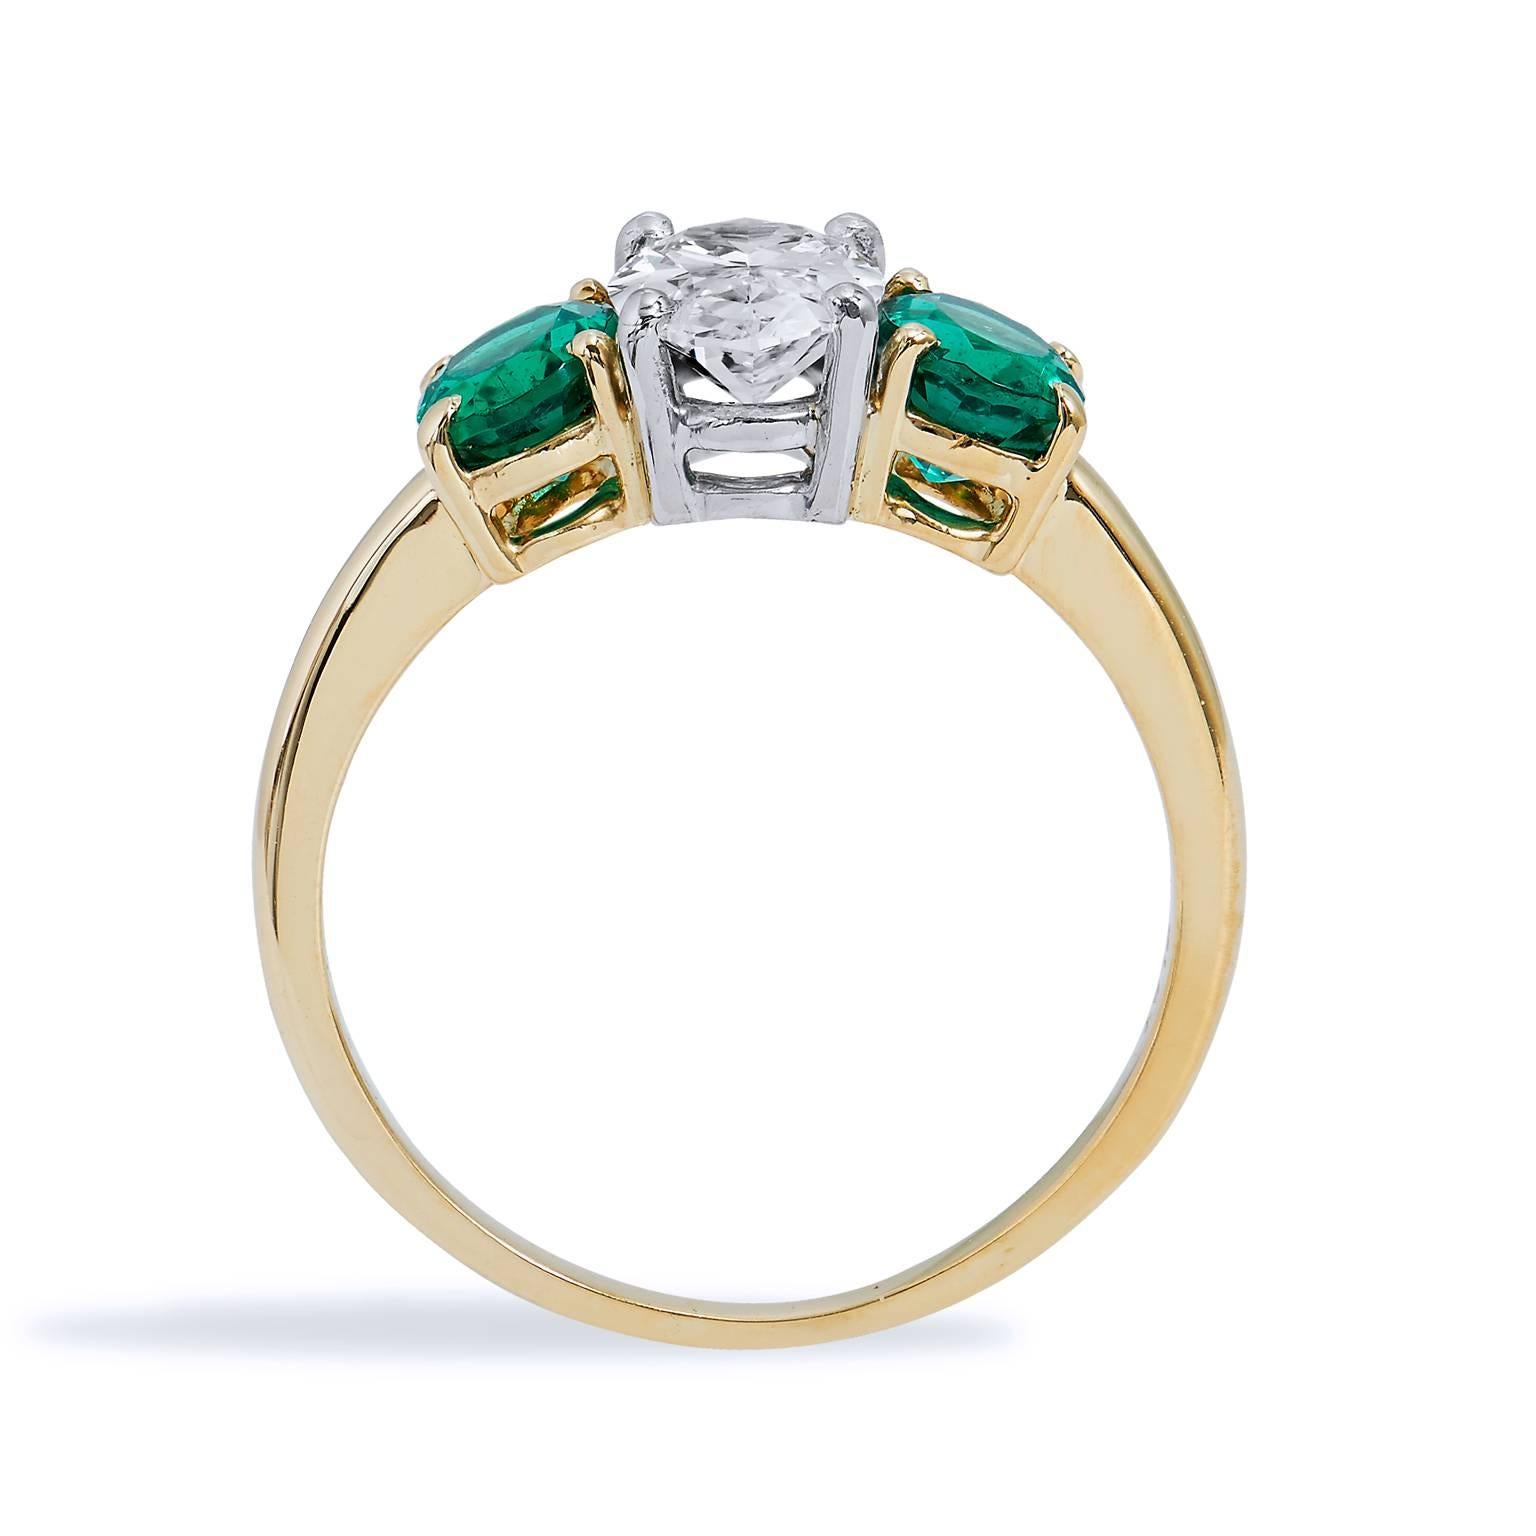 Make this previously loved Tiffany & Co. platinum and 18 karat yellow gold three oval diamond and emerald ring- an everyday expression of luxury, yours. This ring features a 1.05 carat oval diamond at center (F/WS2; GIA #6183239317) with two